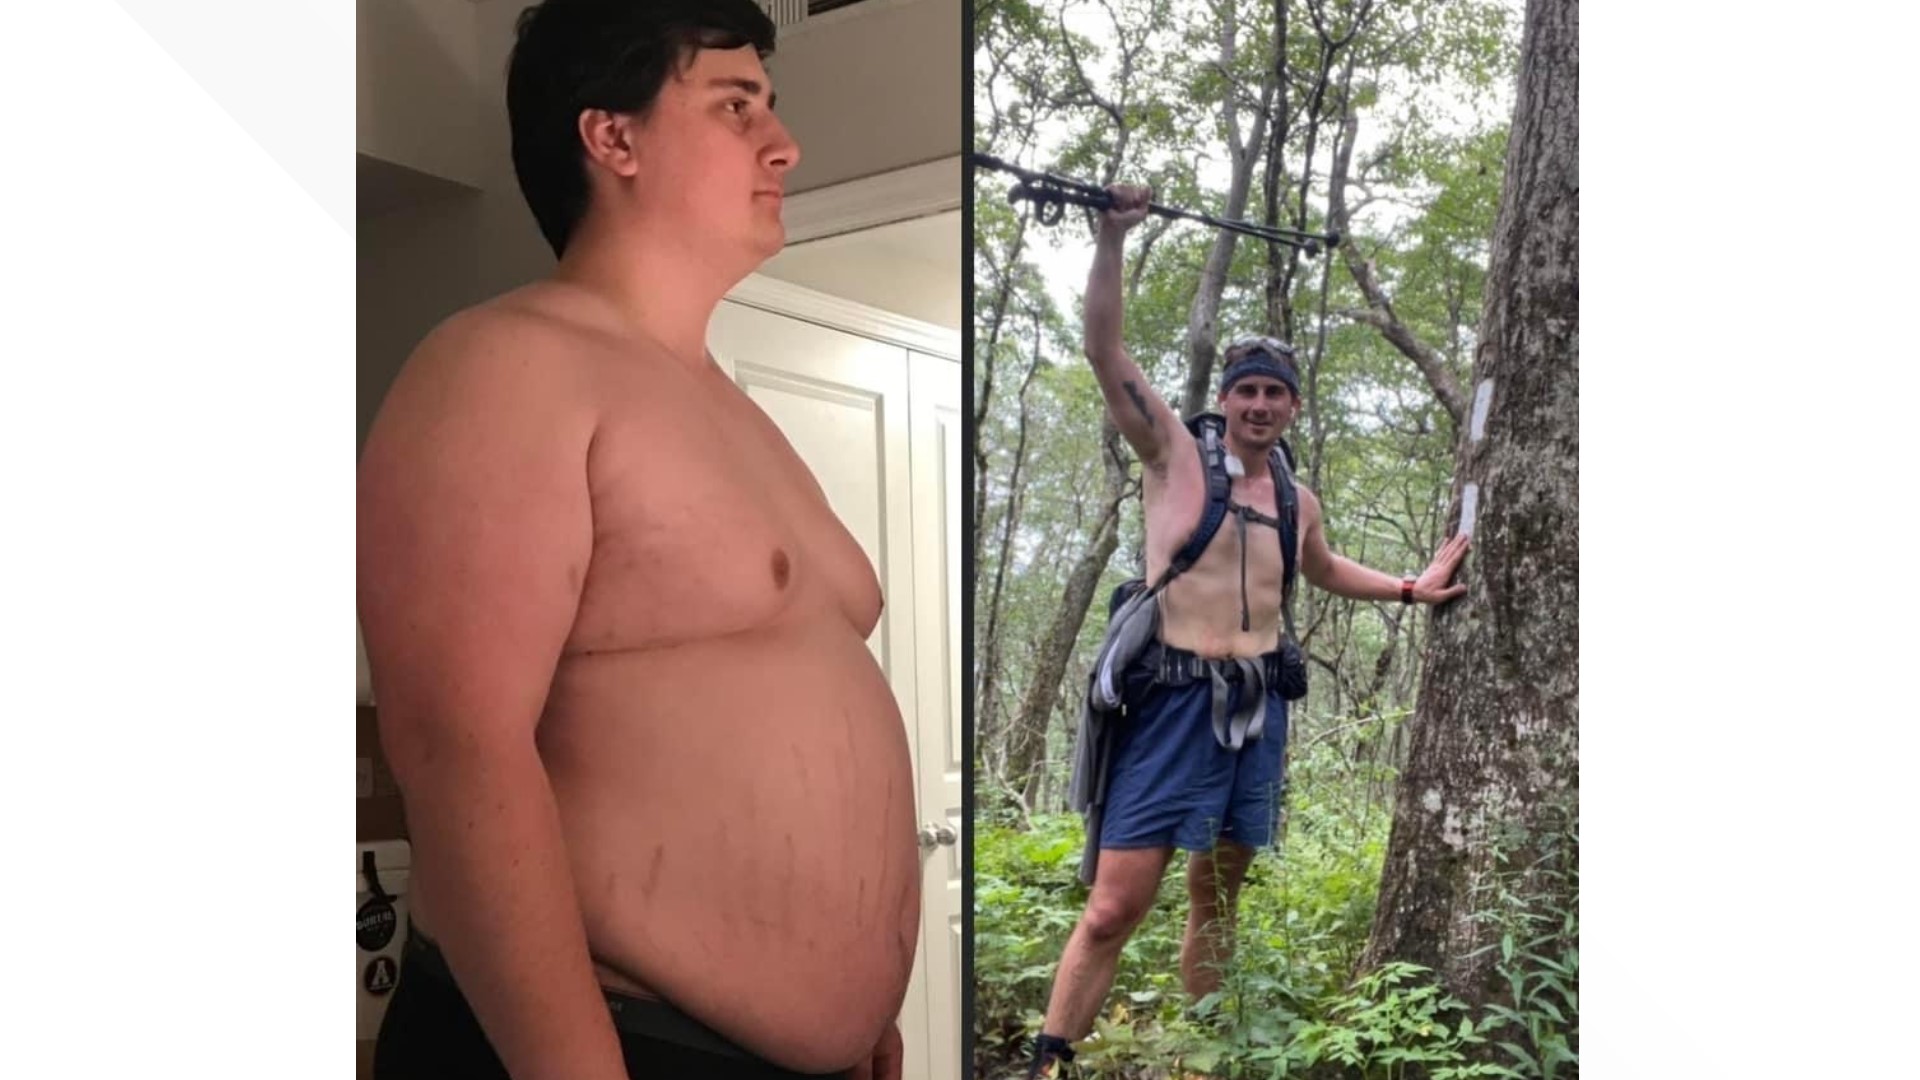 Zach Cross started his journey in May 2020. Now he's hoping to take on his most daring adventure yet, the Appalachian Trail.